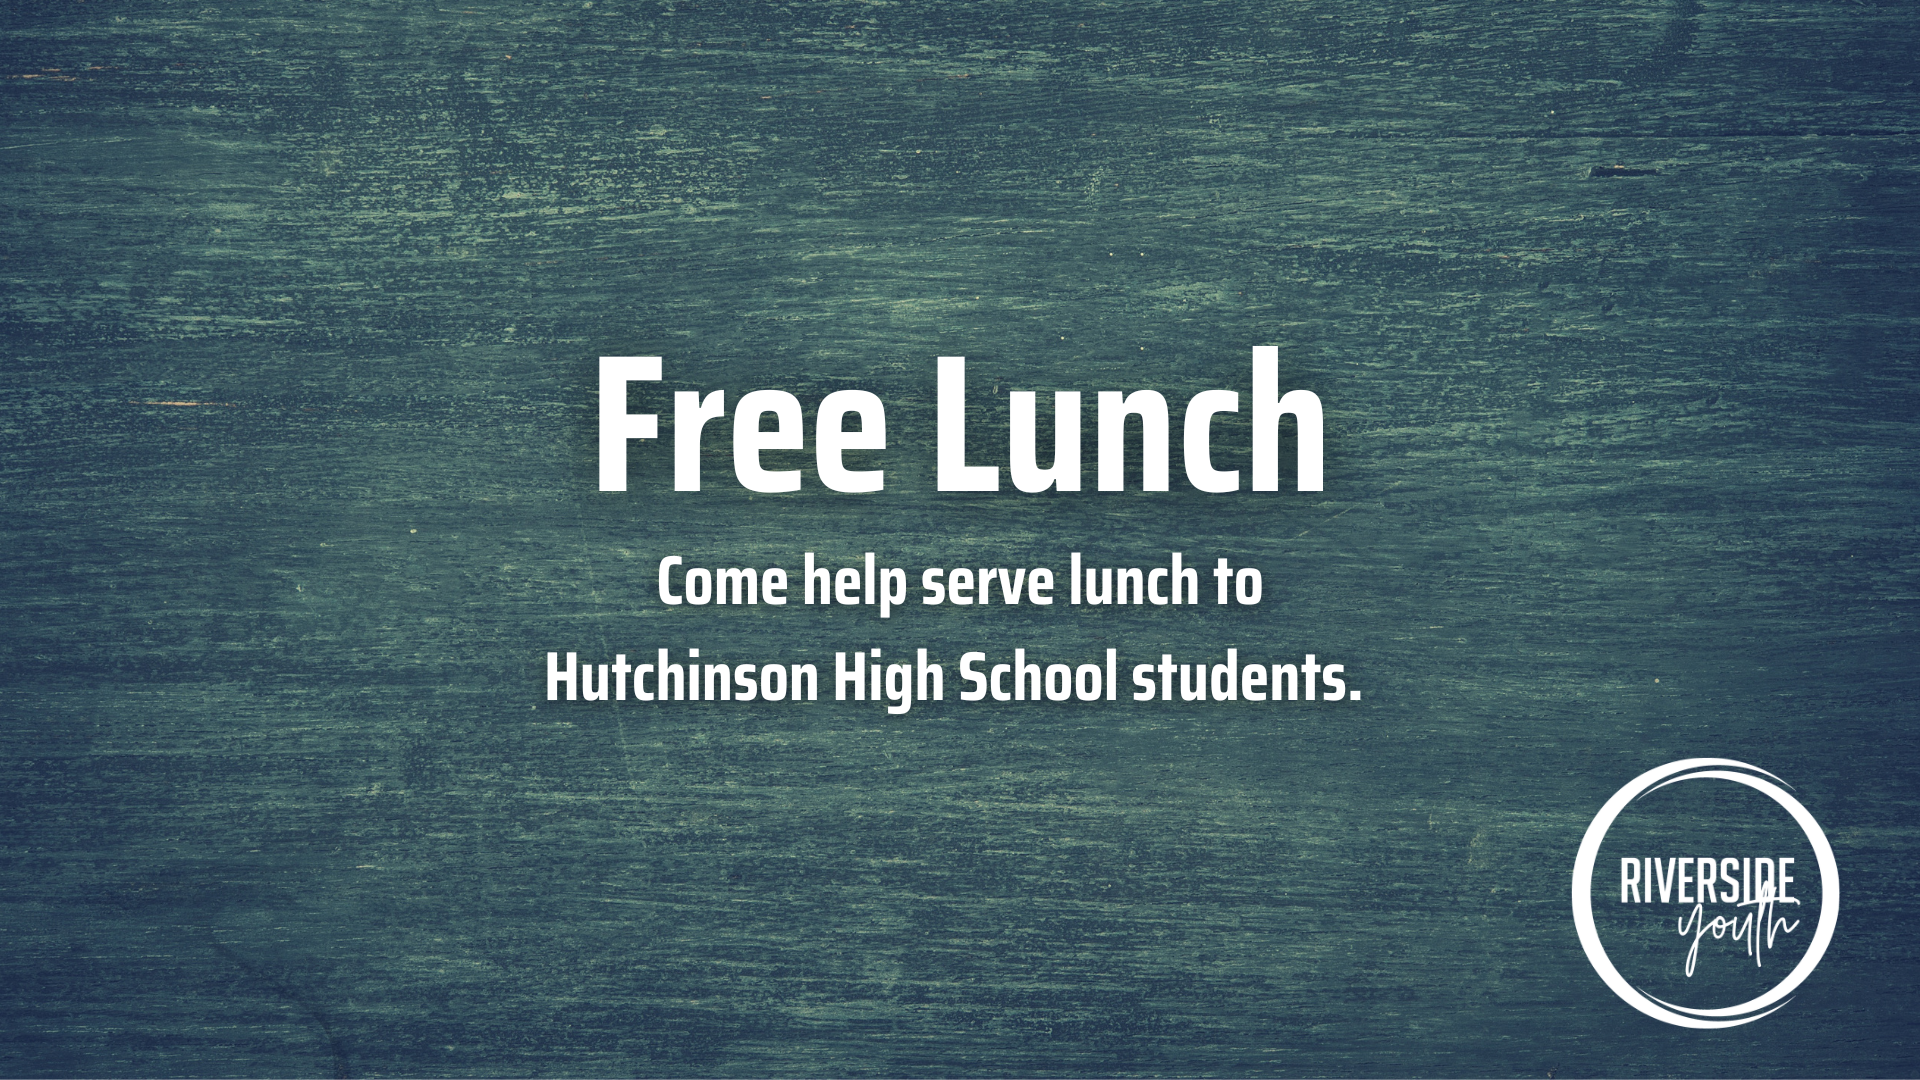 Free Lunch image